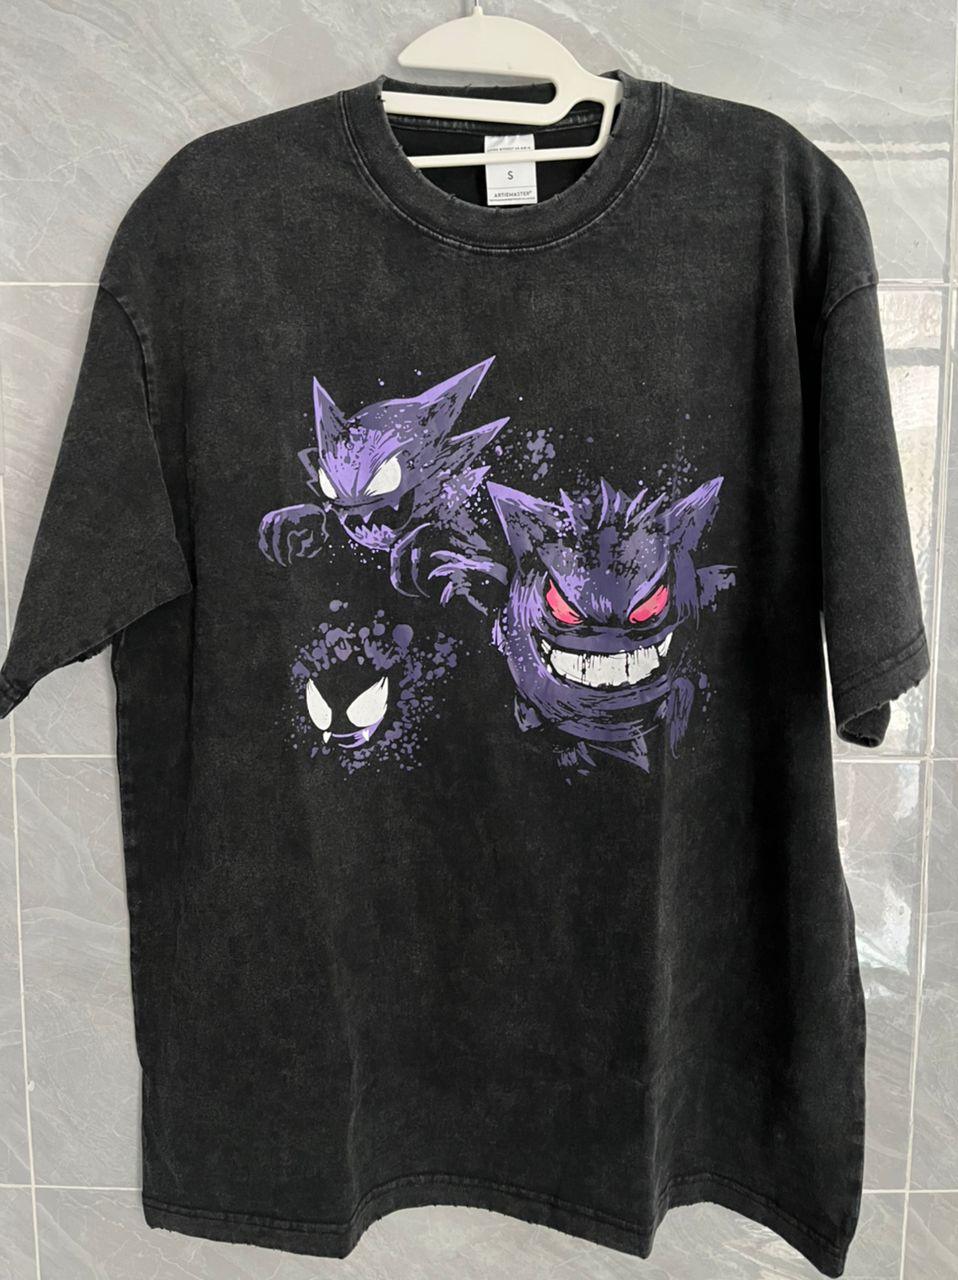 Harajuku Streetwear - Vintage Washed "Ghosts" Oversized Tee - Shop High Quality Japanese Streetwear, Anime Clothing, Asian Street Fashion and Many More!